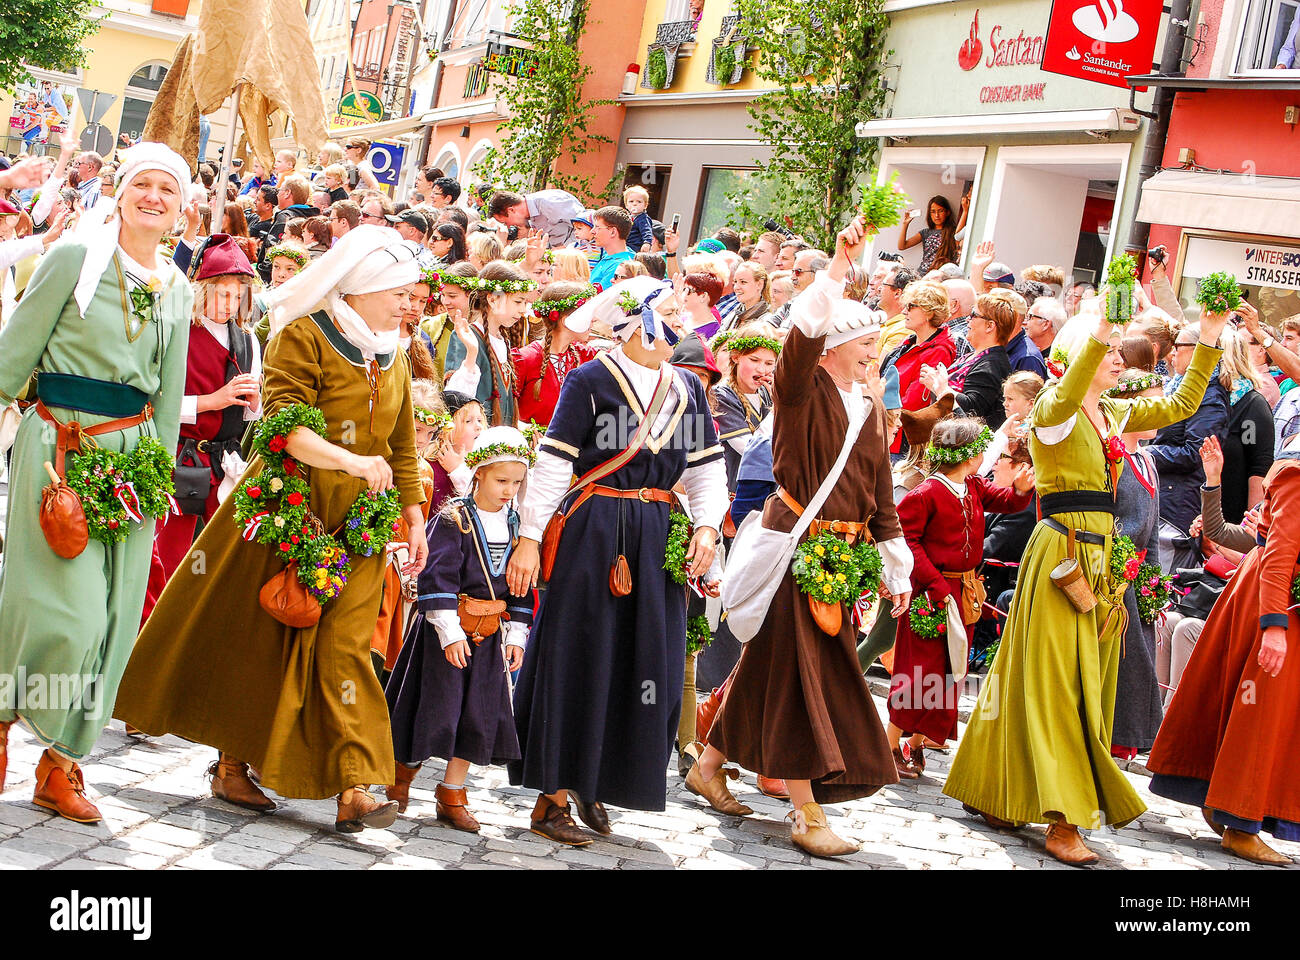 People in medieval costumes wave to the crowds at the start of the parade during the Landshuter Hochzeit medieval pageant Stock Photo